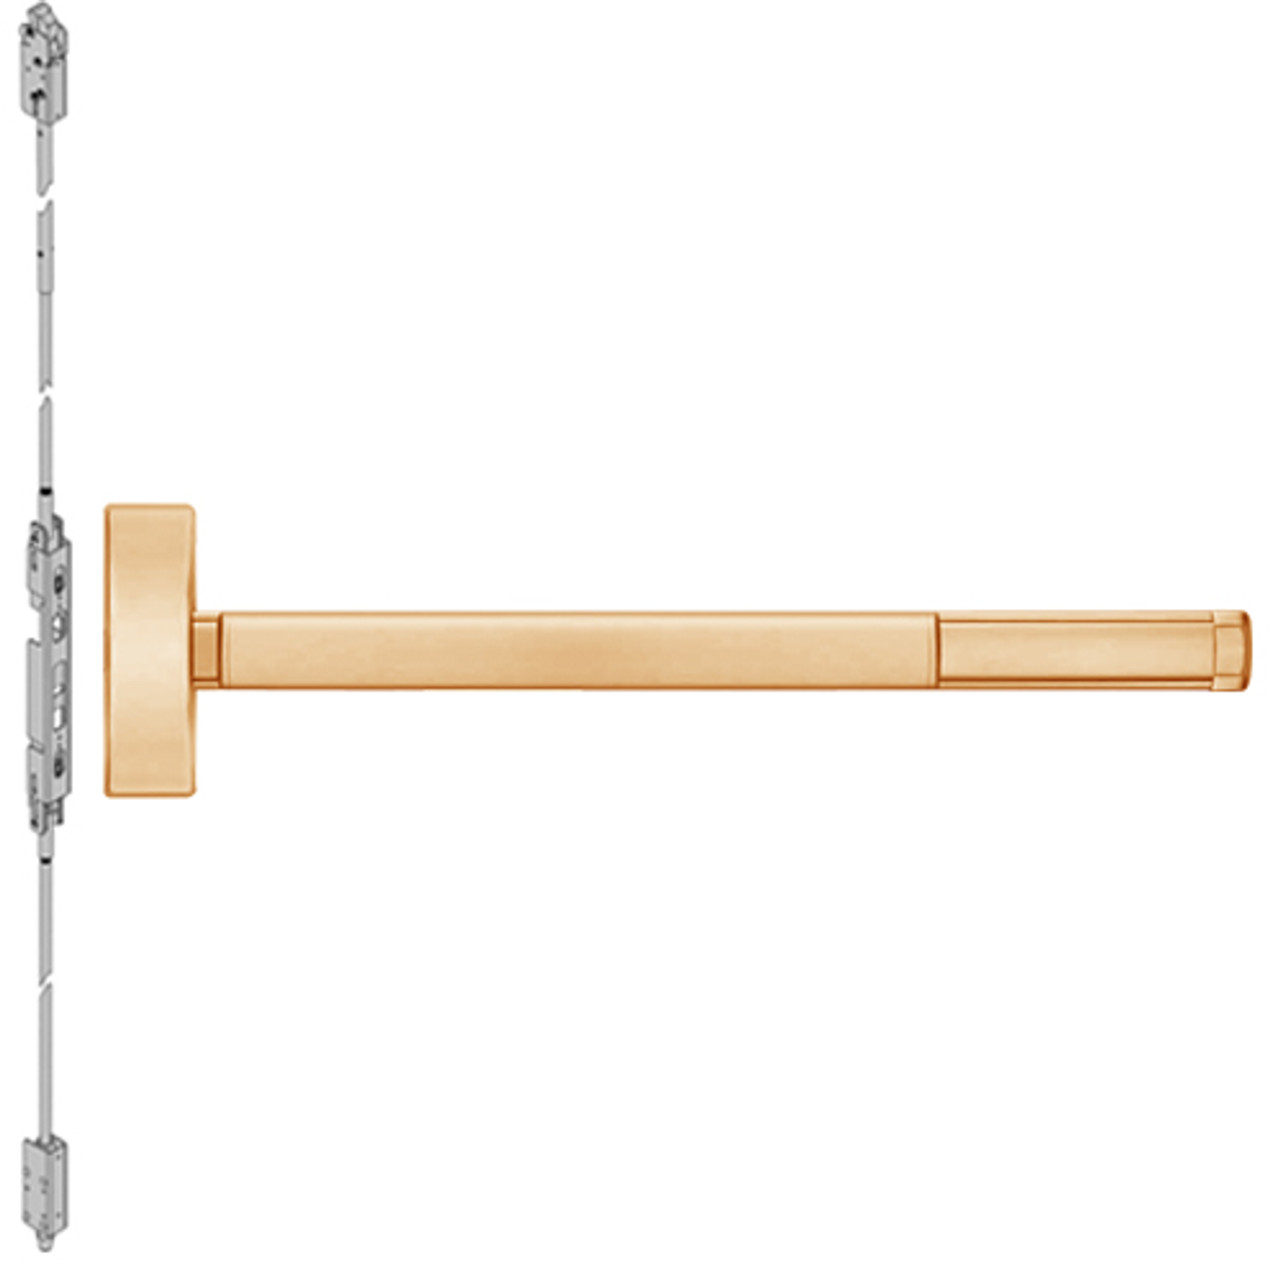 ELR2805LBR-612-36 PHI 2800 Series Concealed Vertical Rod Exit Device with Electric Latch Retraction Prepped for Key Controls Thumb Piece in Satin Bronze Finish